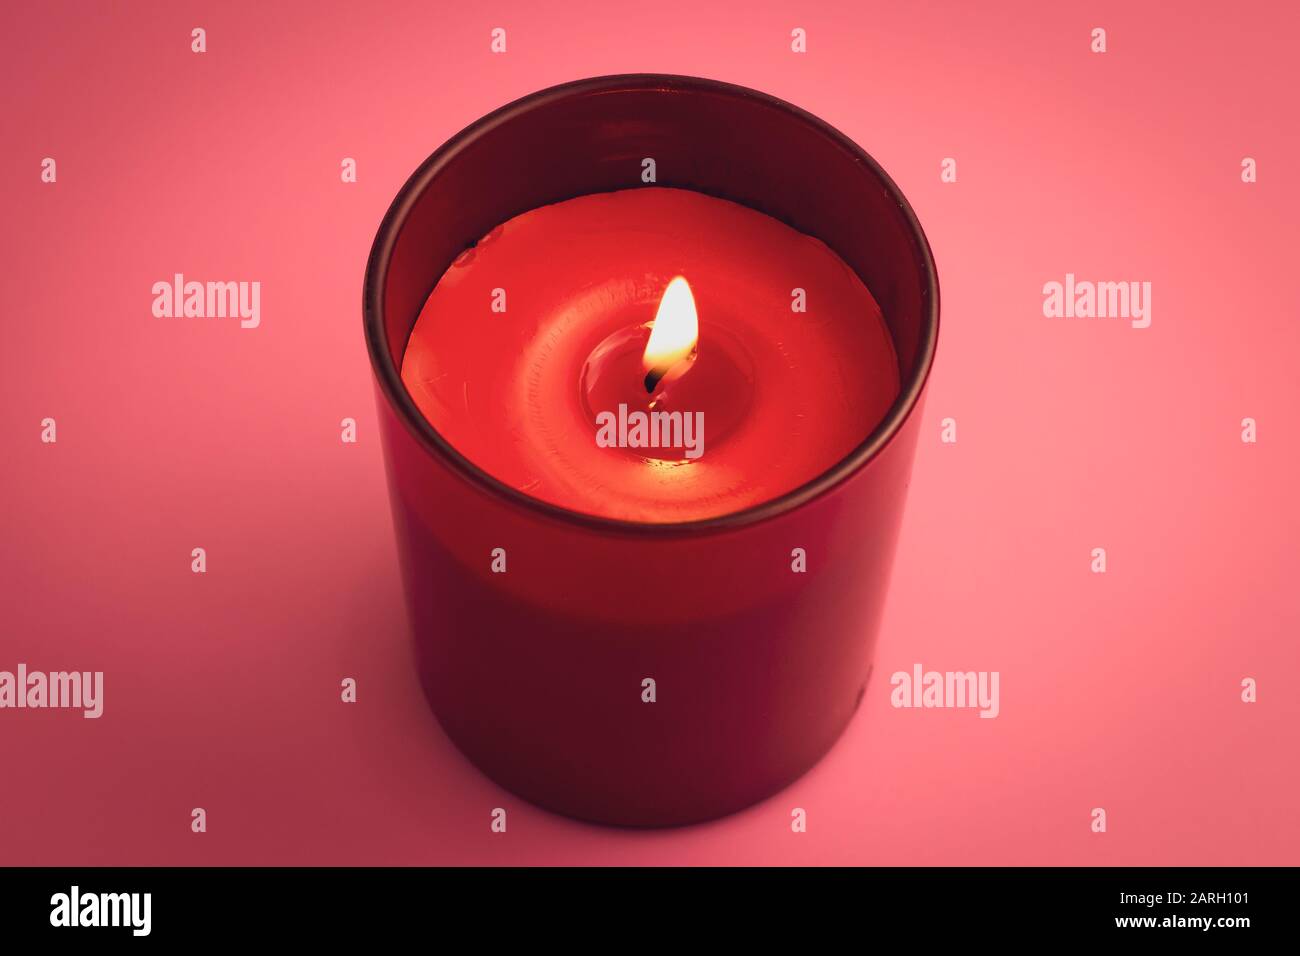 Red candle with flame on pink background. Aromatherapy, relaxation concept Stock Photo